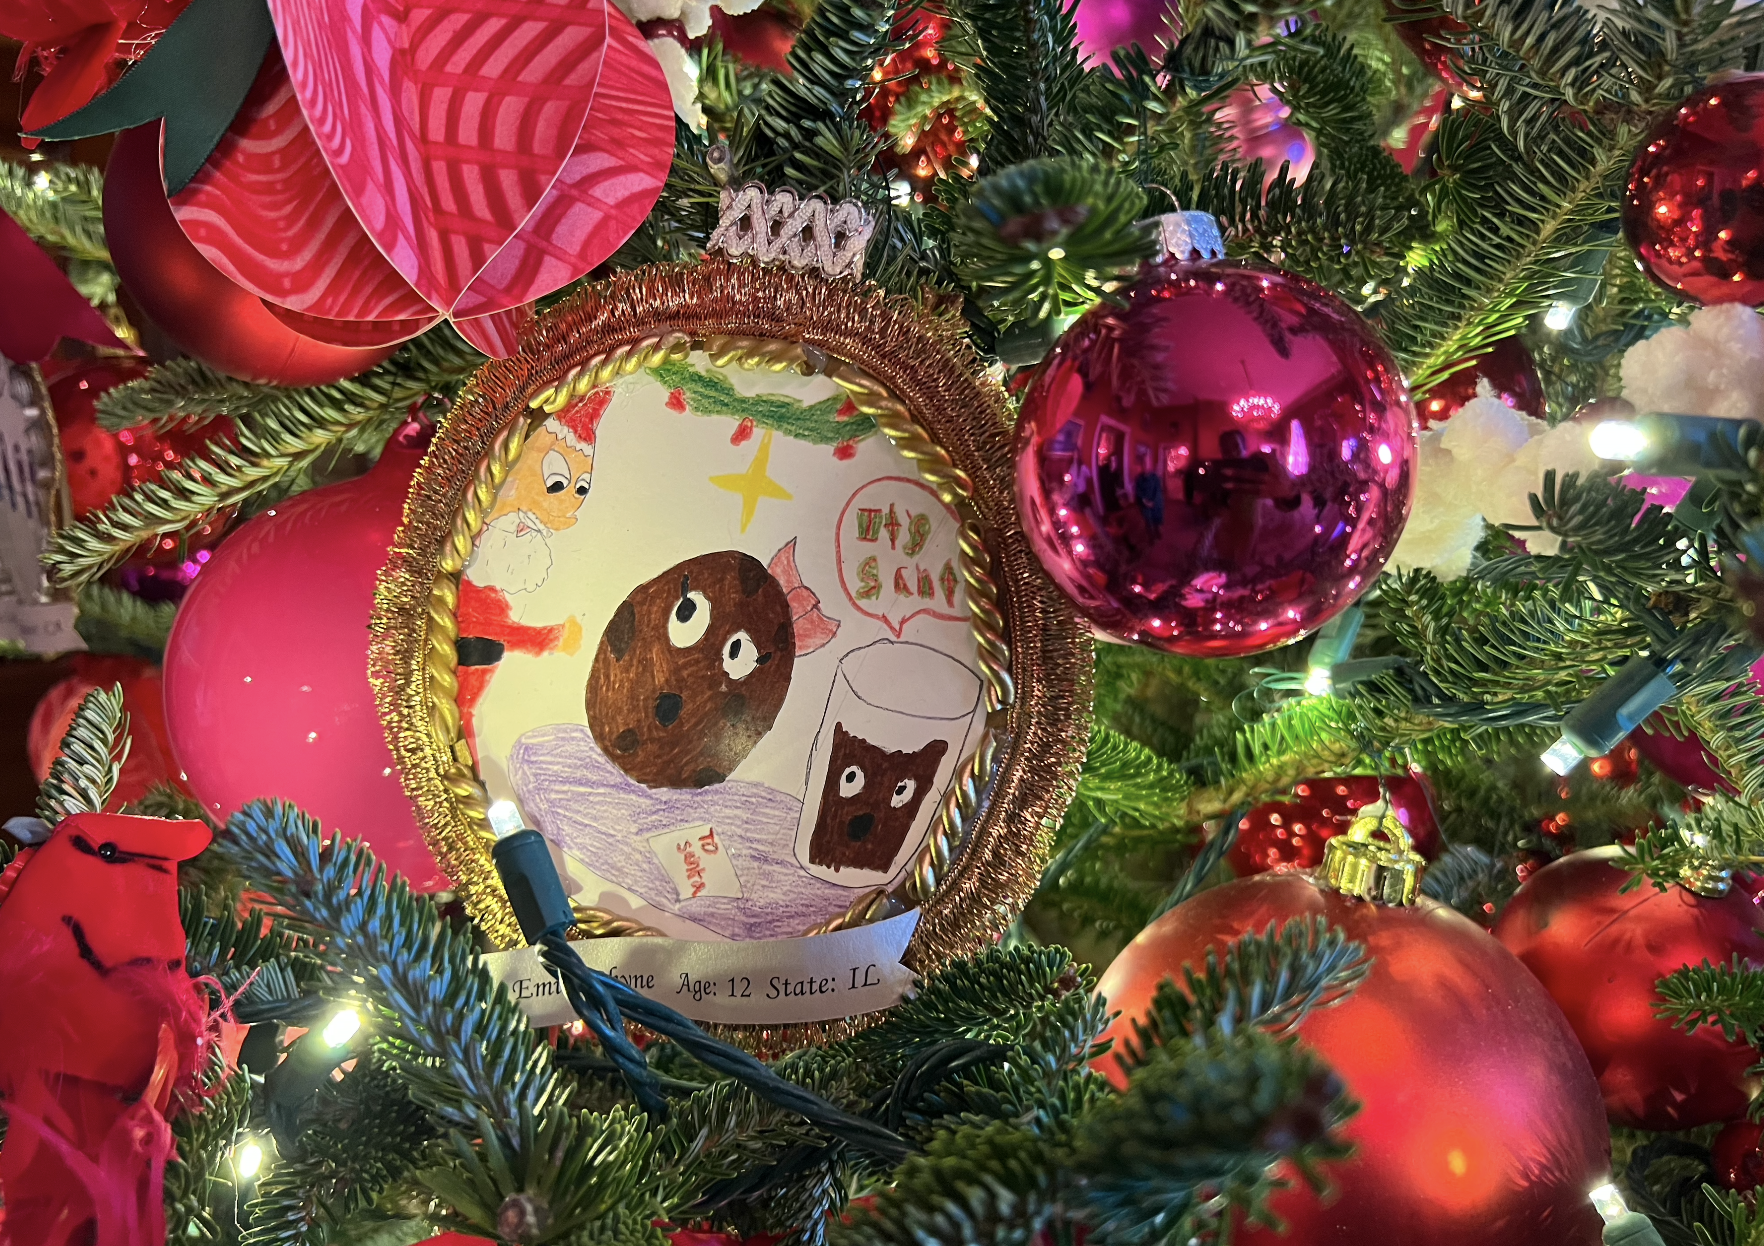 A closeup of a Christmas ornament made by a child.